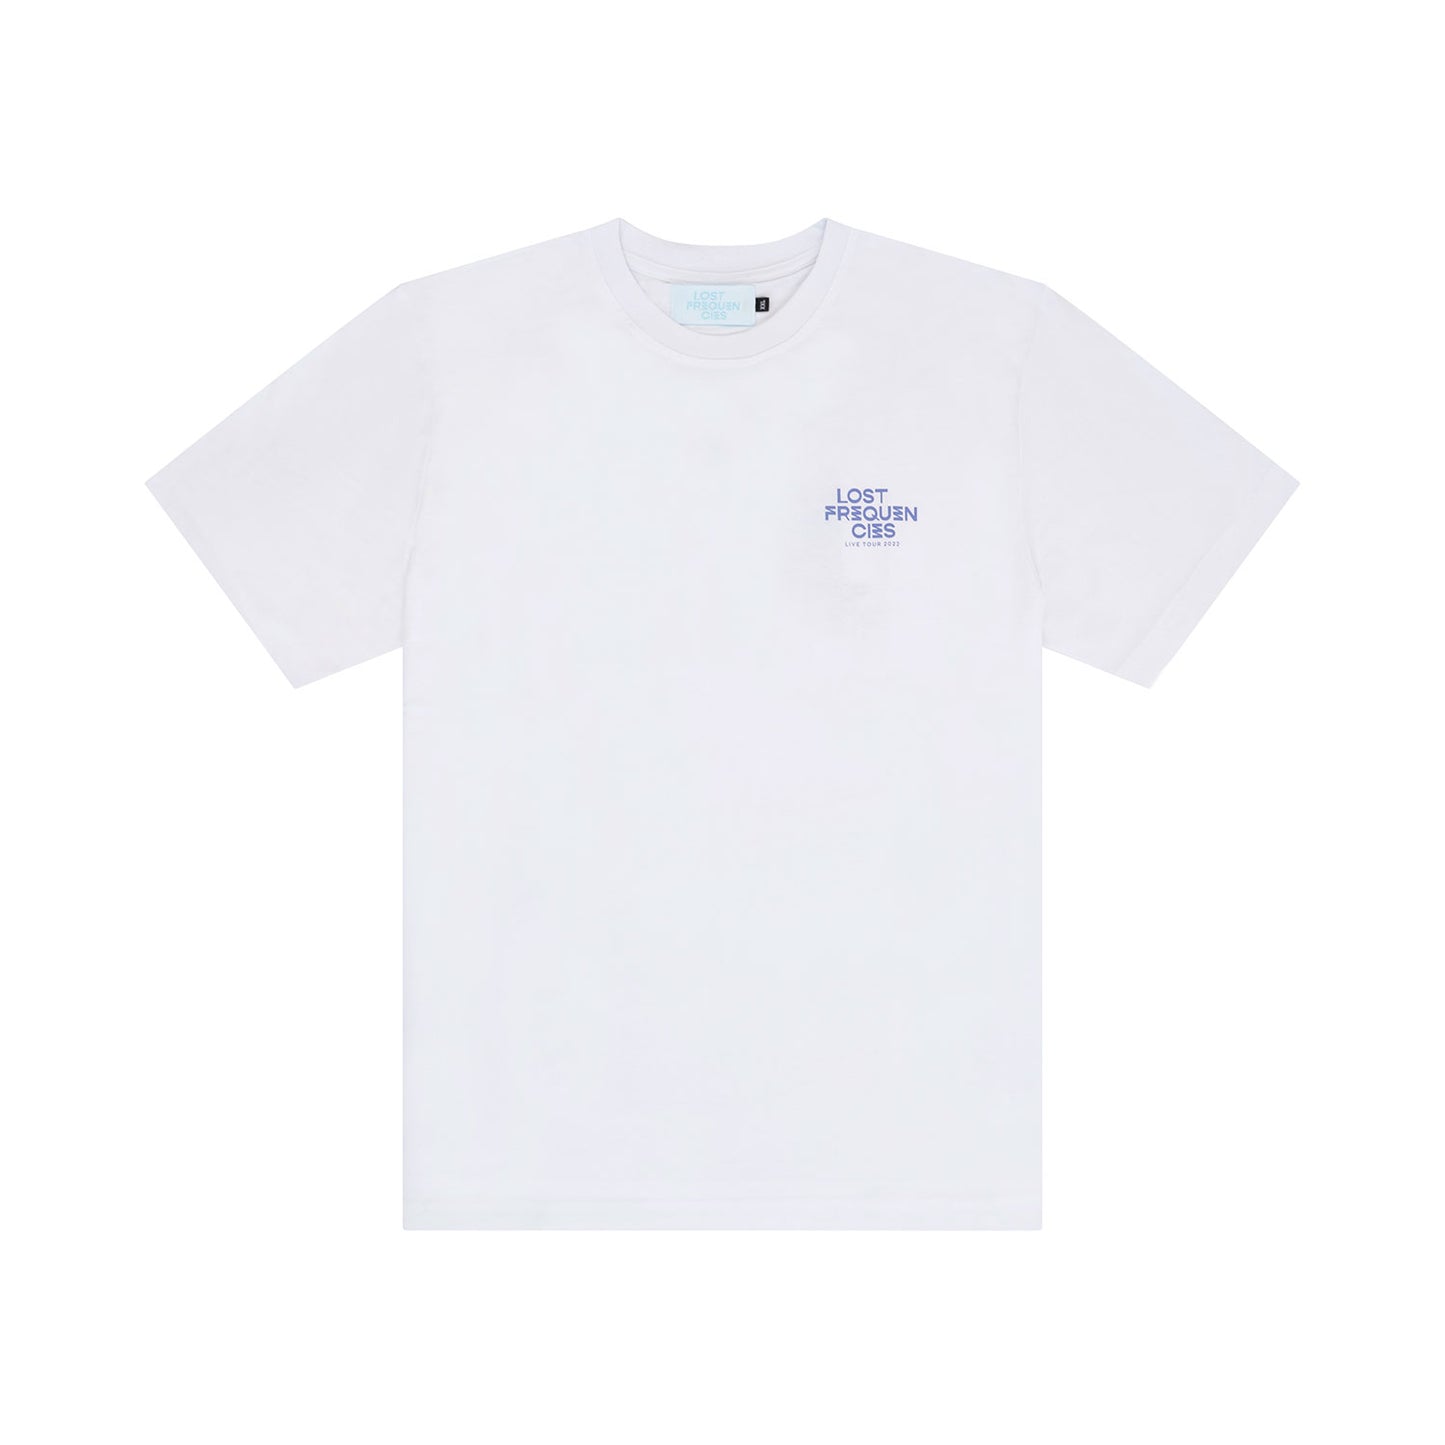 Lost White tee